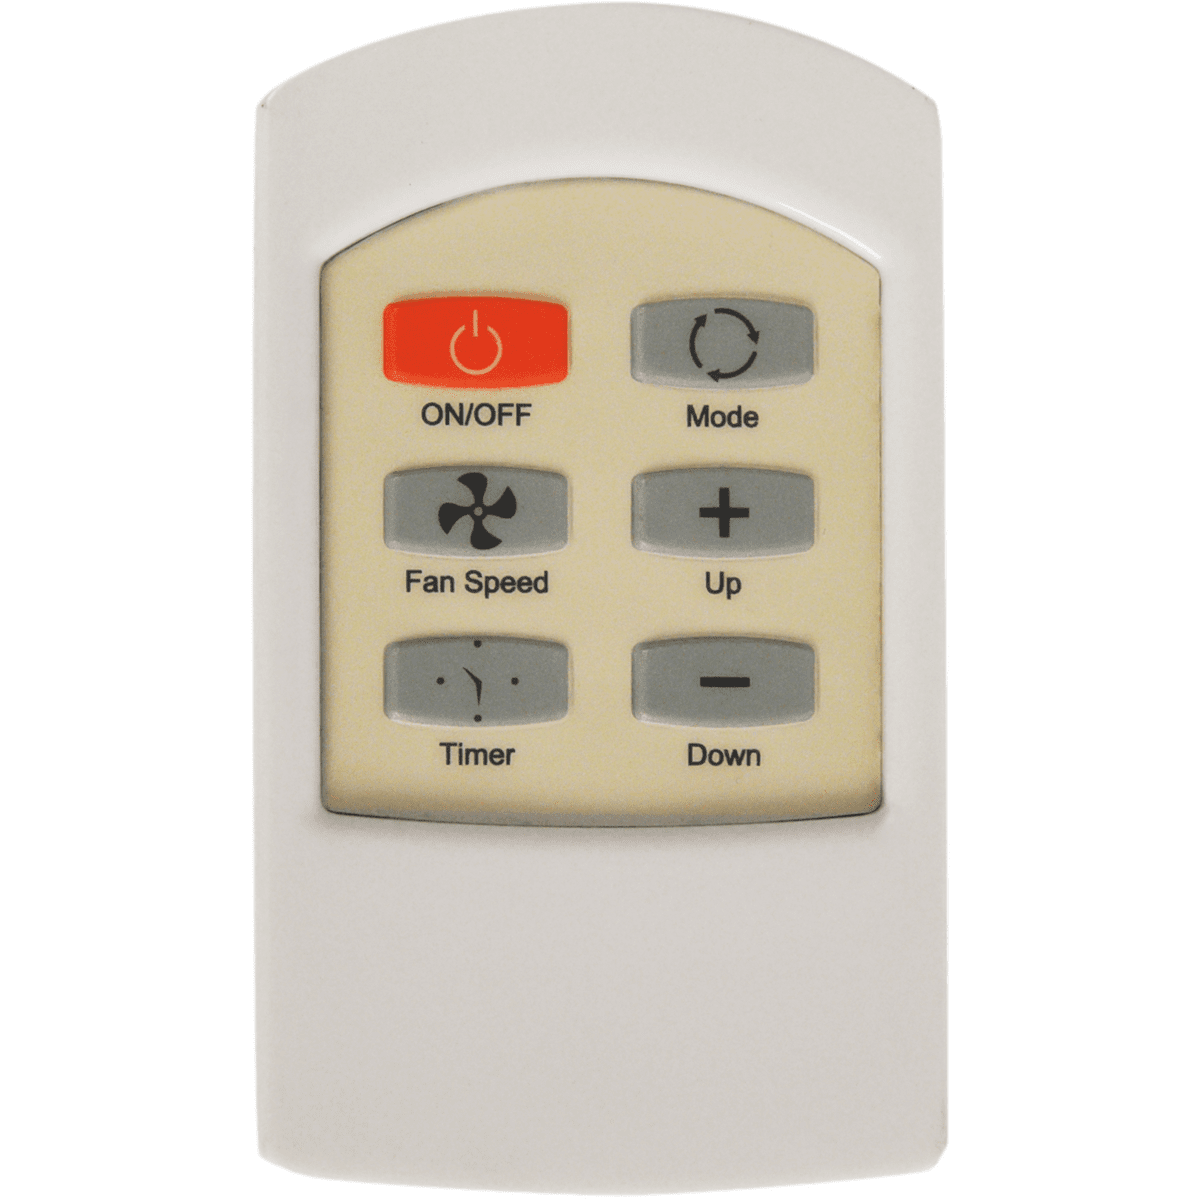 Honeywell Remote Control for MF Series Portable Air Conditioners - White -  A2530-430-AA01 - White